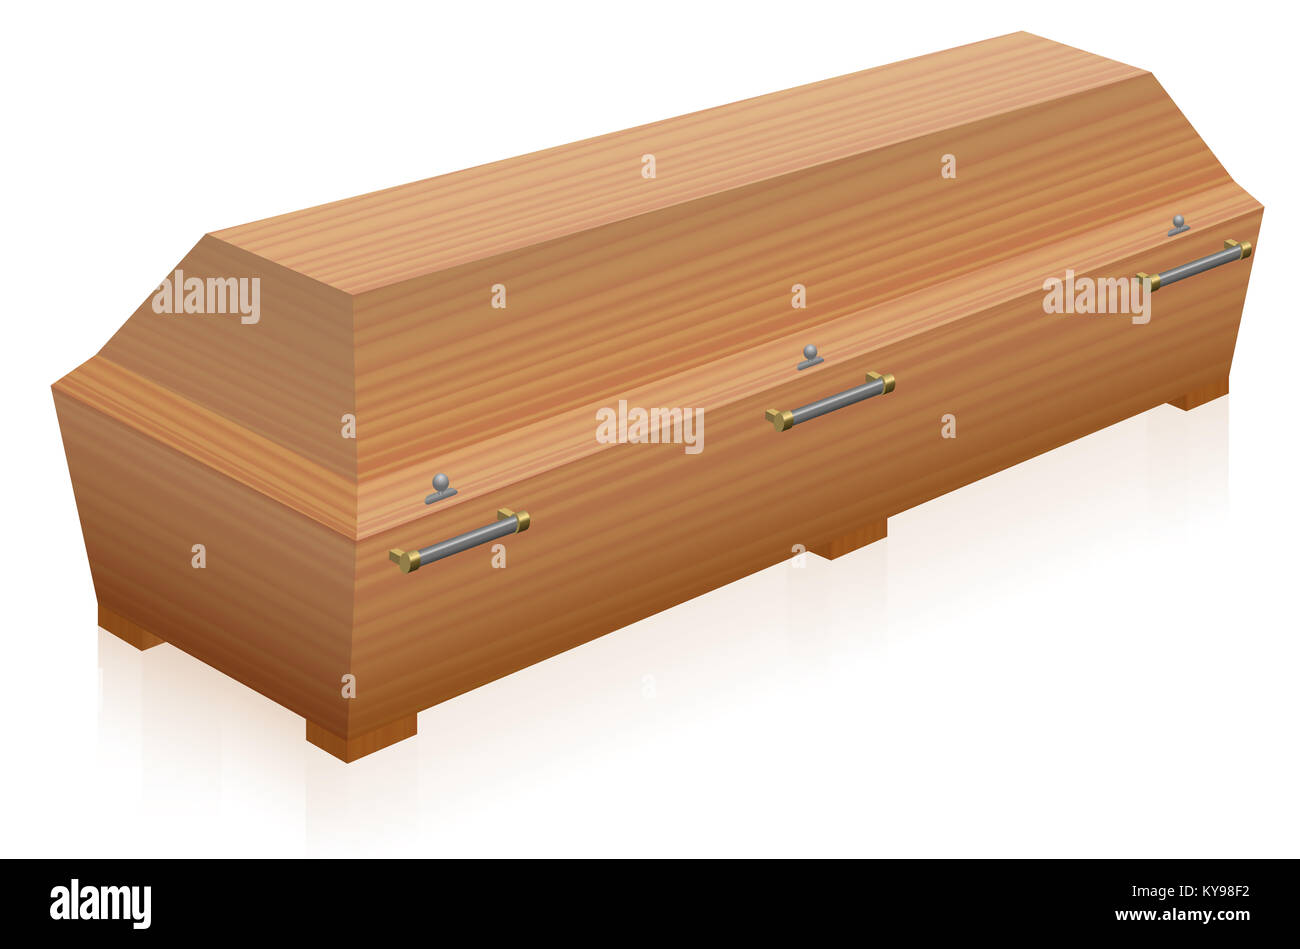 Coffin - massive, solid, light brown wooden casket - three-dimensional illustration on white background. Stock Photo